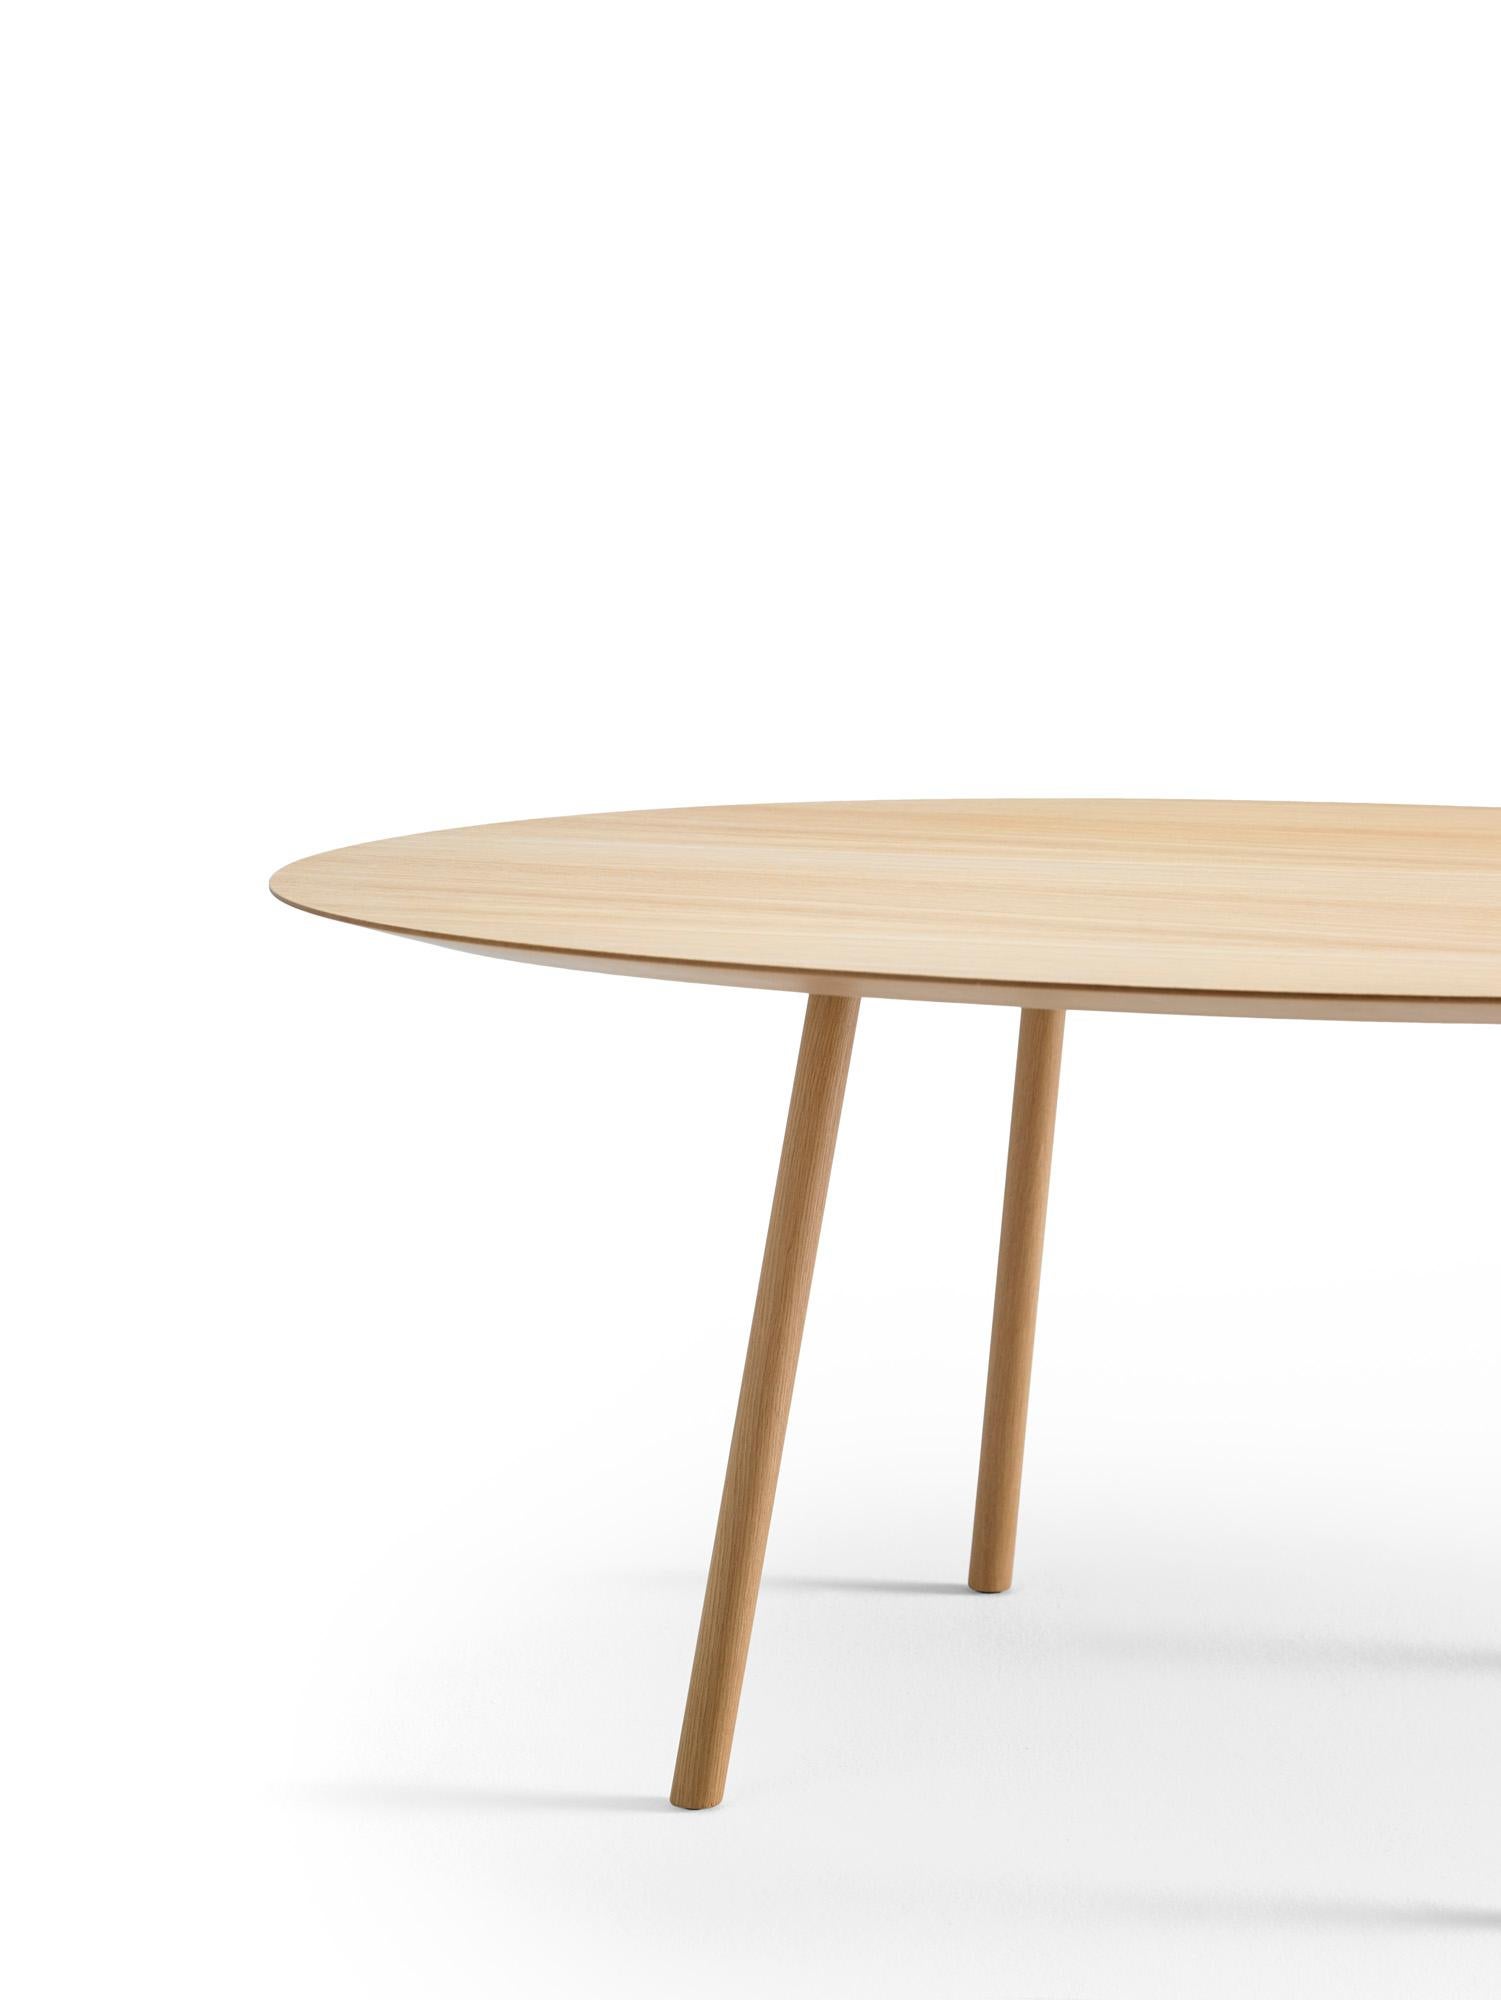 Dining table series of visual lightness manufactured by Viccarbe and designed by Victor Carrasco. 

The beauty of the table comes from its almost 